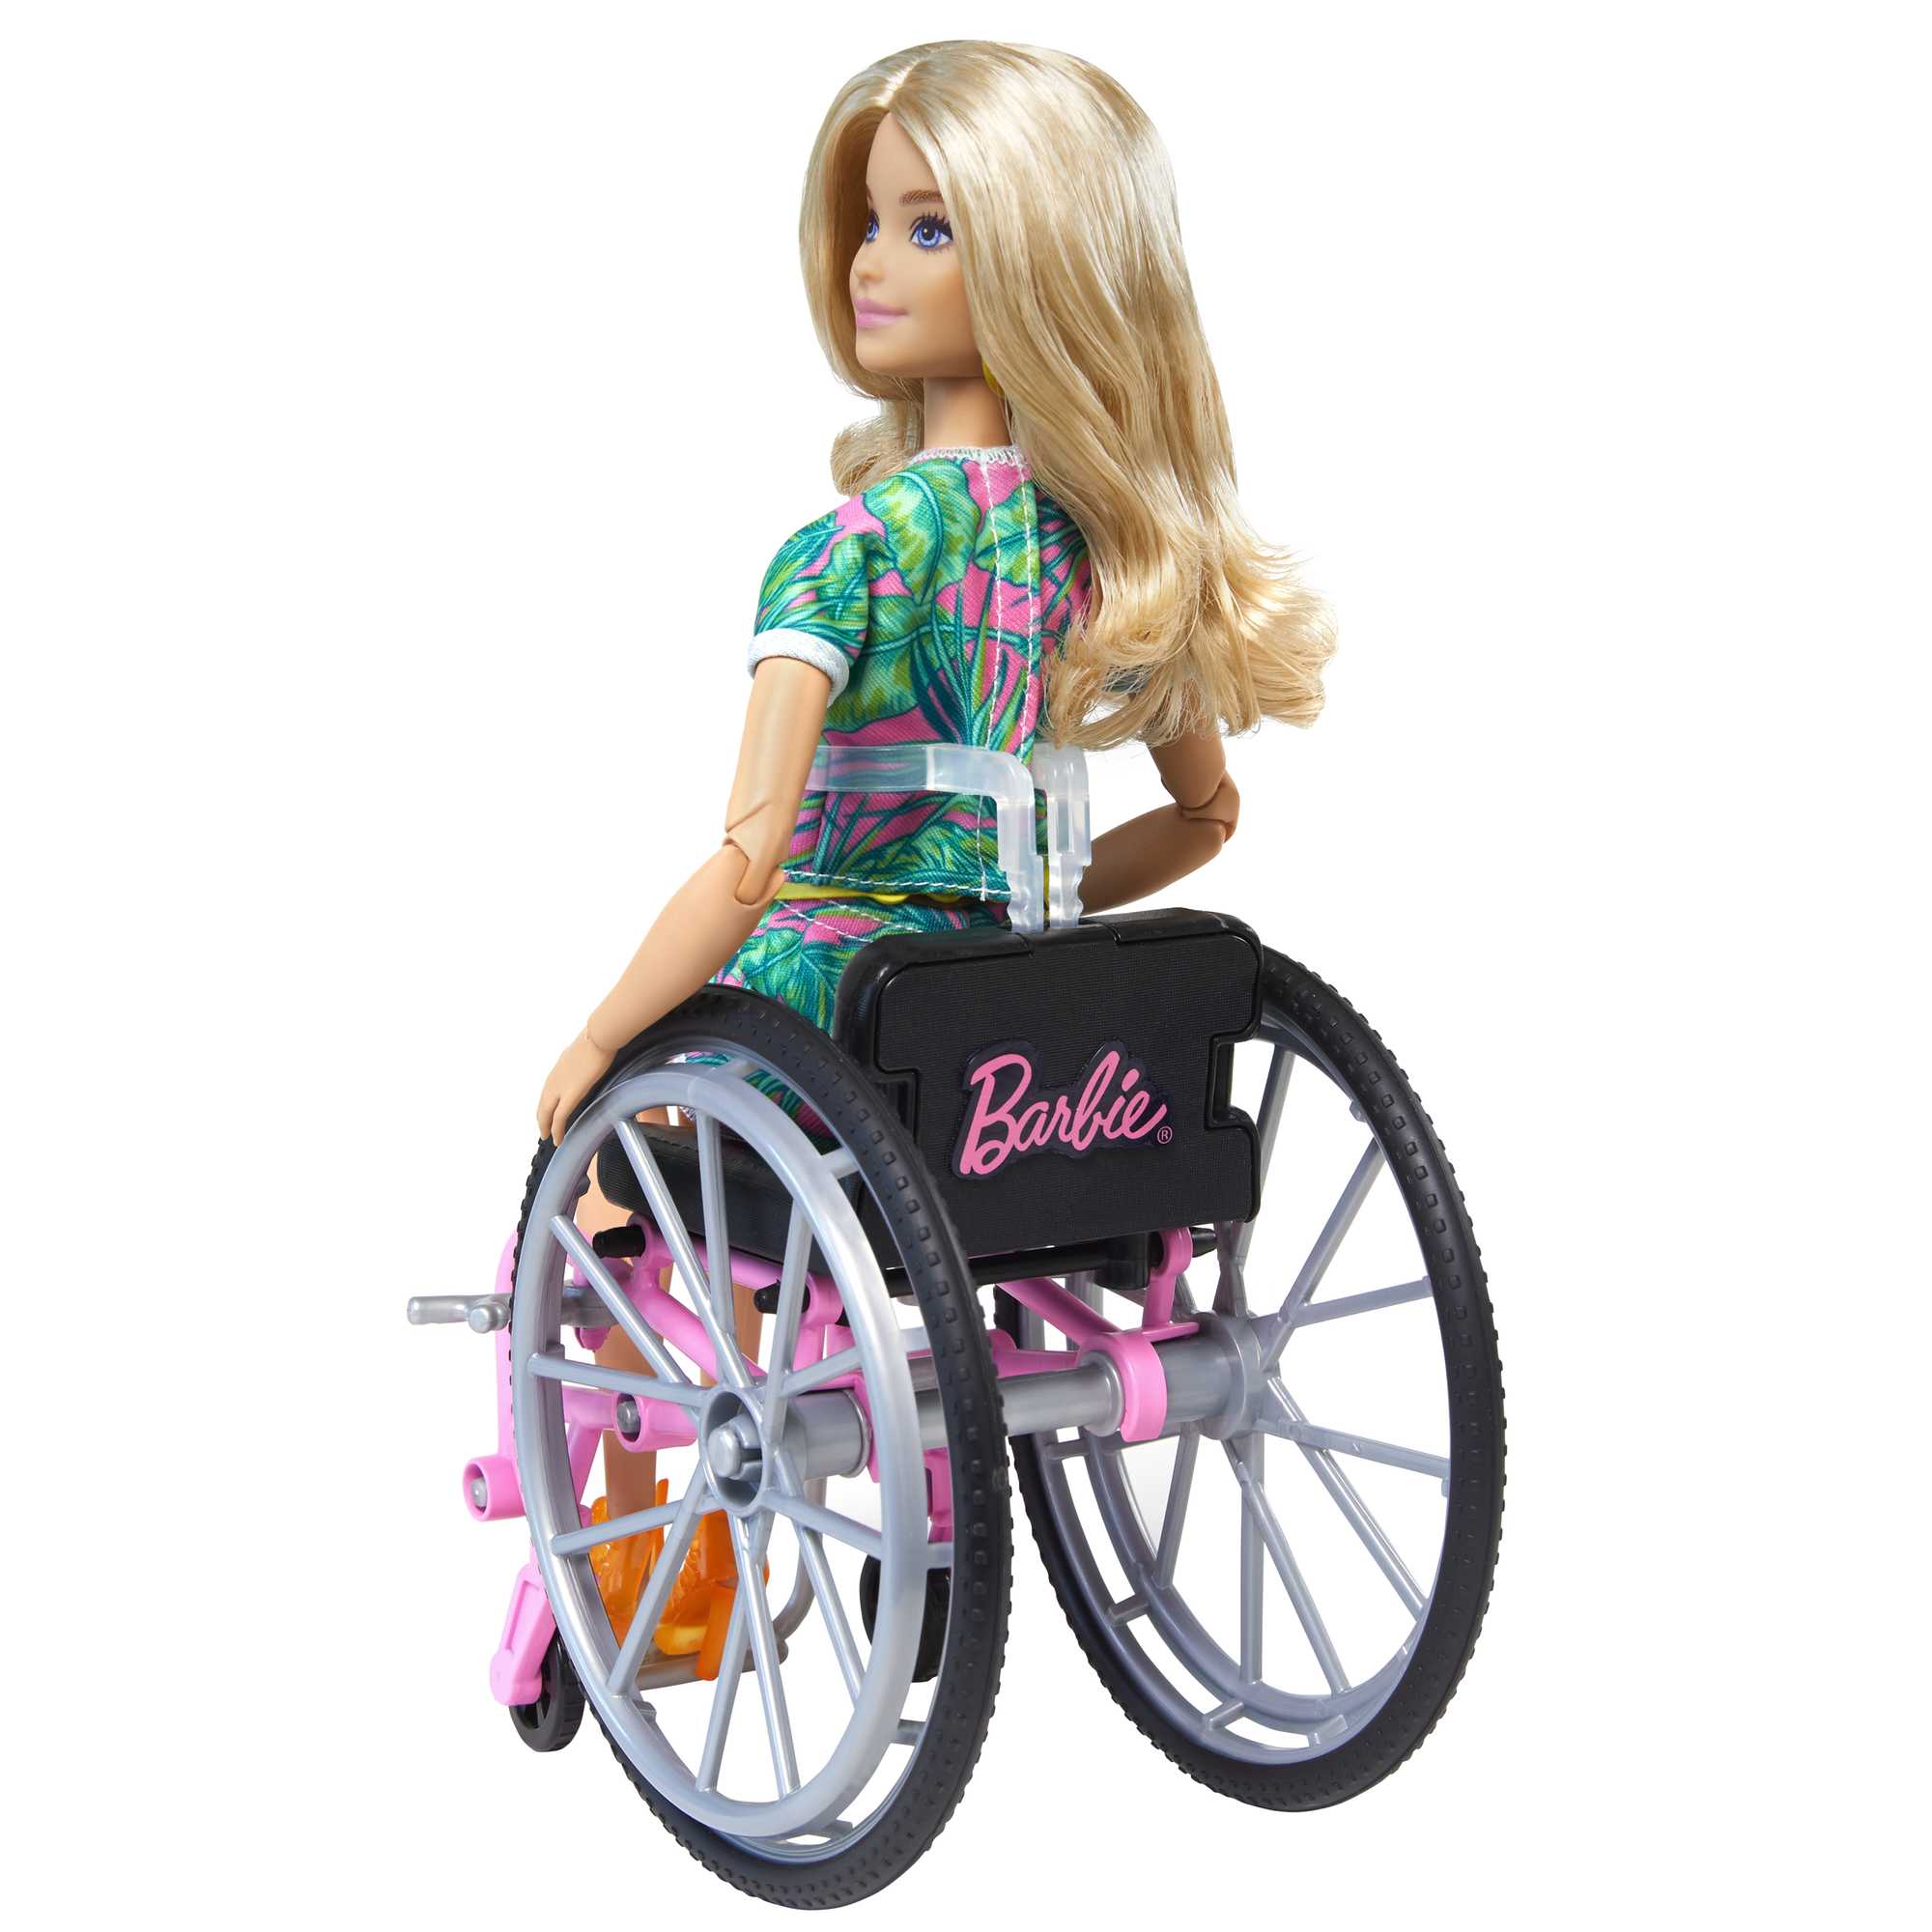 Barbie Doll and Accessory #165, GRB93